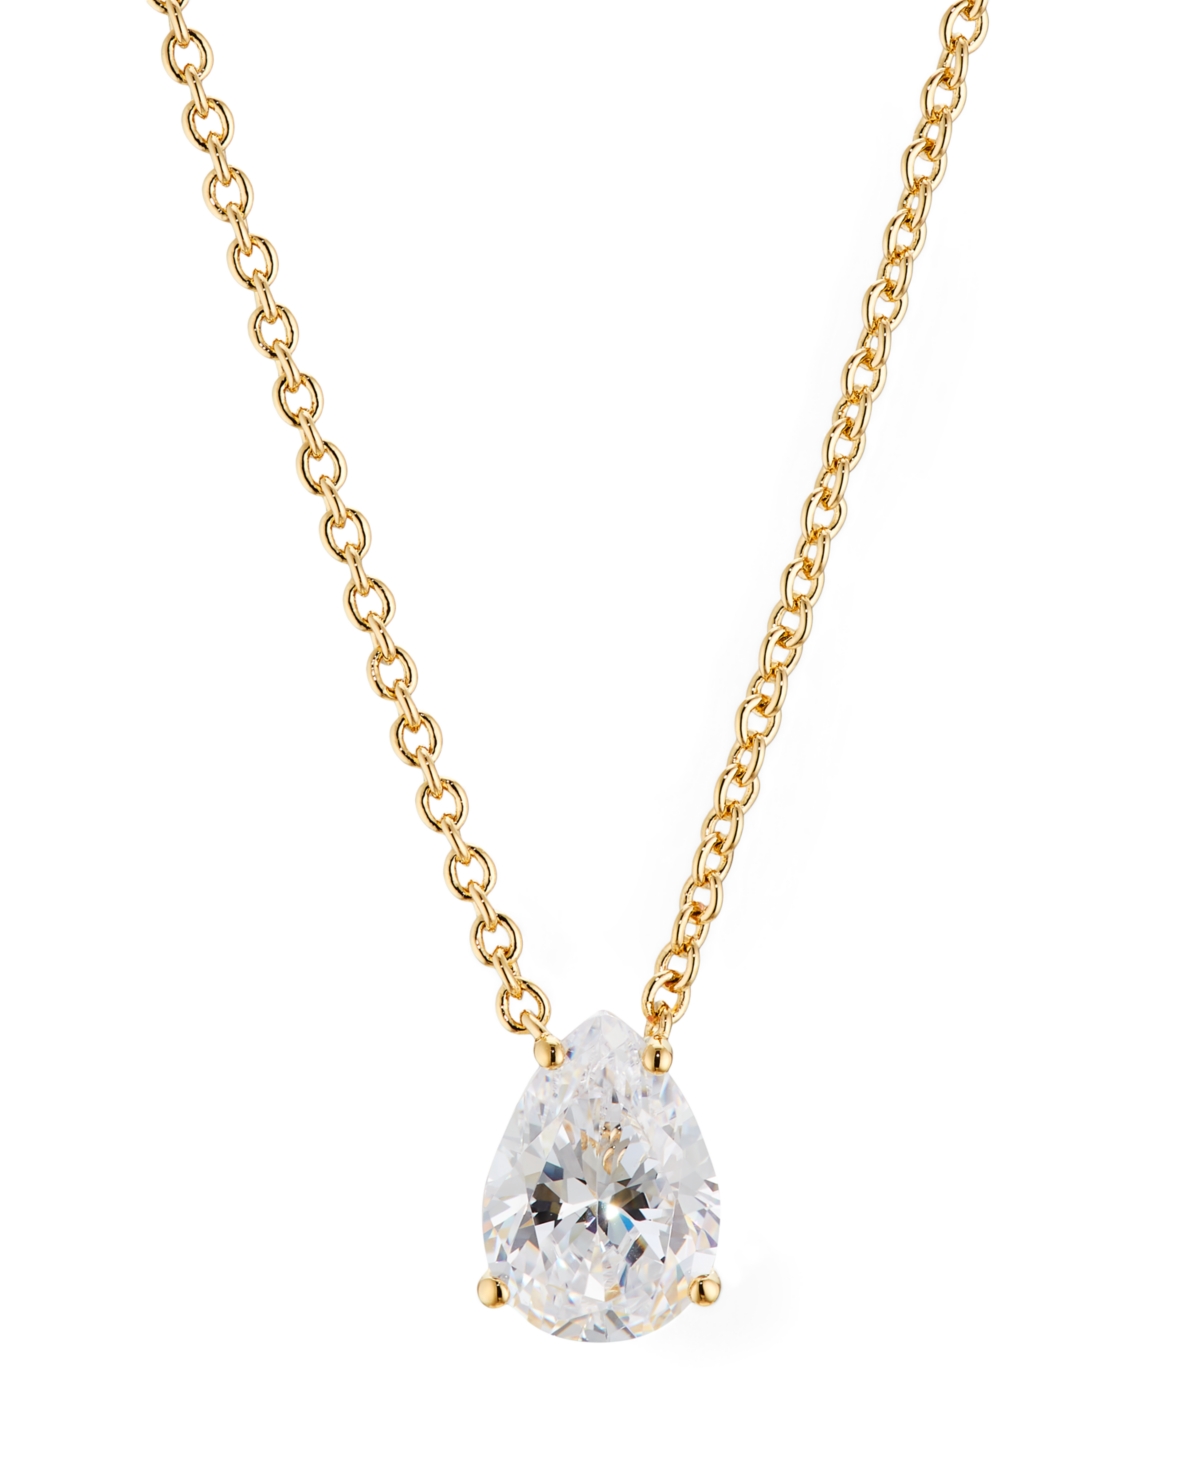 Pear Cubic Zirconia Necklace, 16" + 2" extender, Created for Macy's - Gold